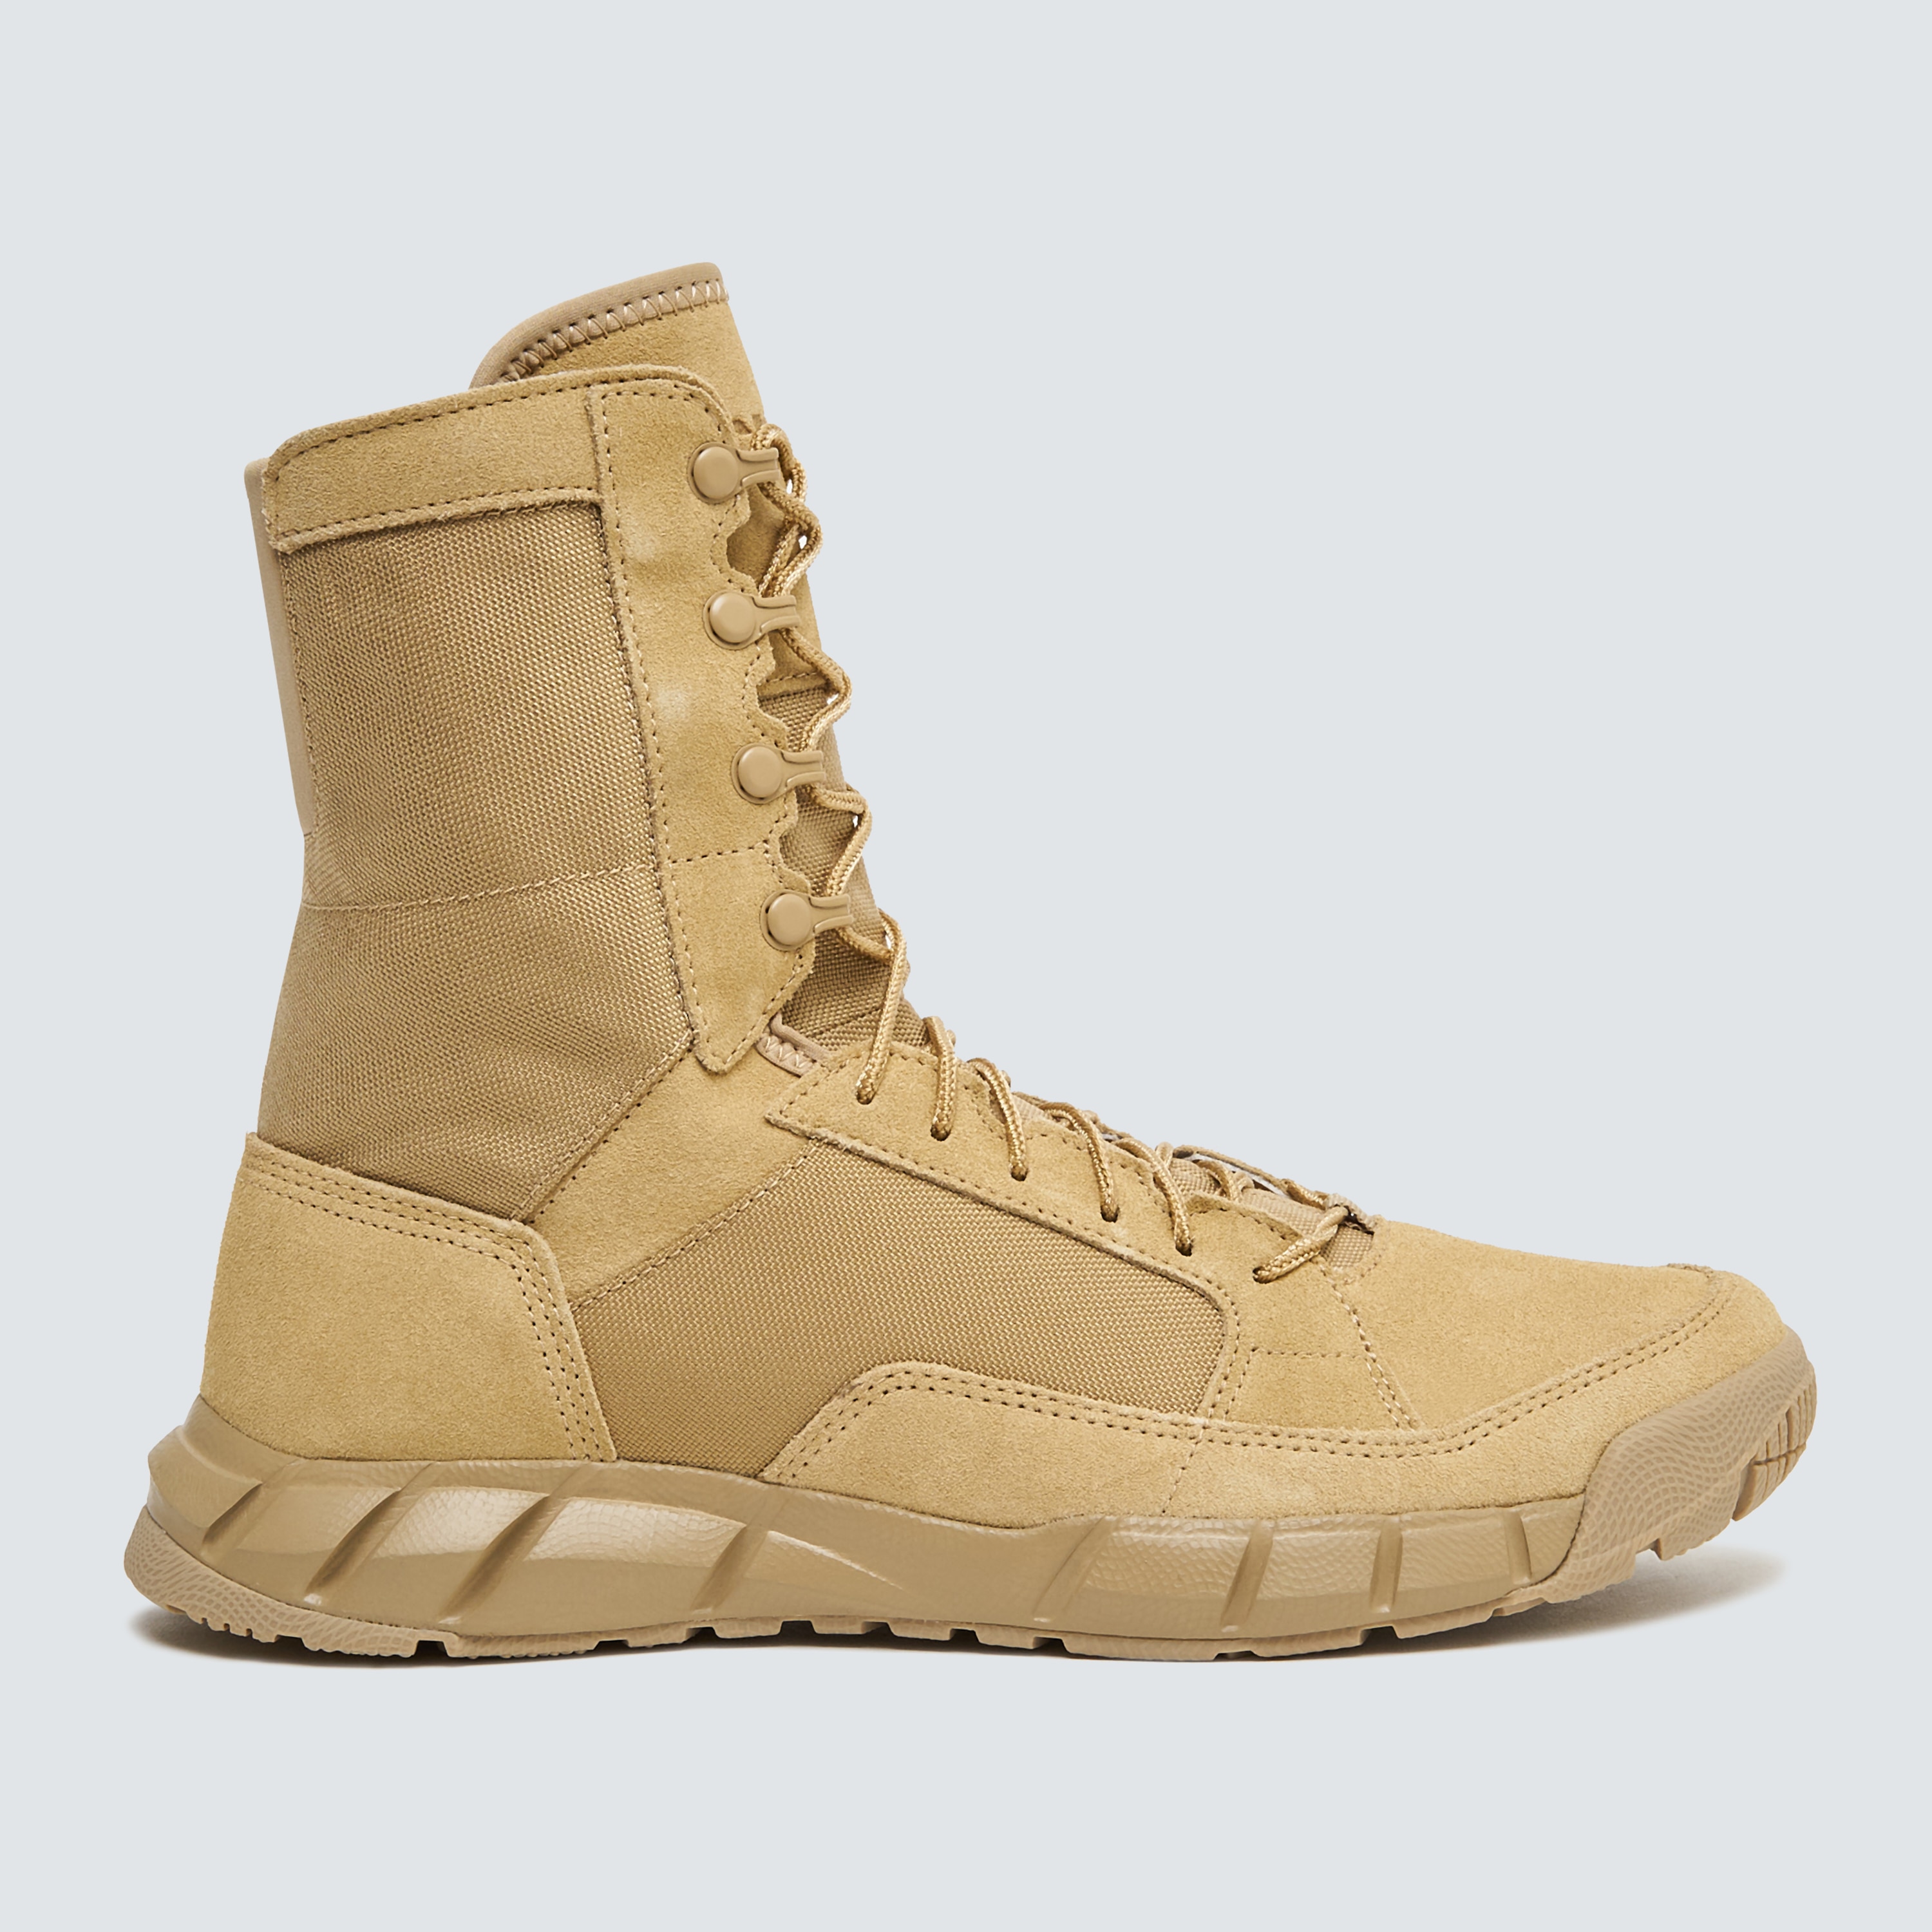 Falange oakley military boots coyote 